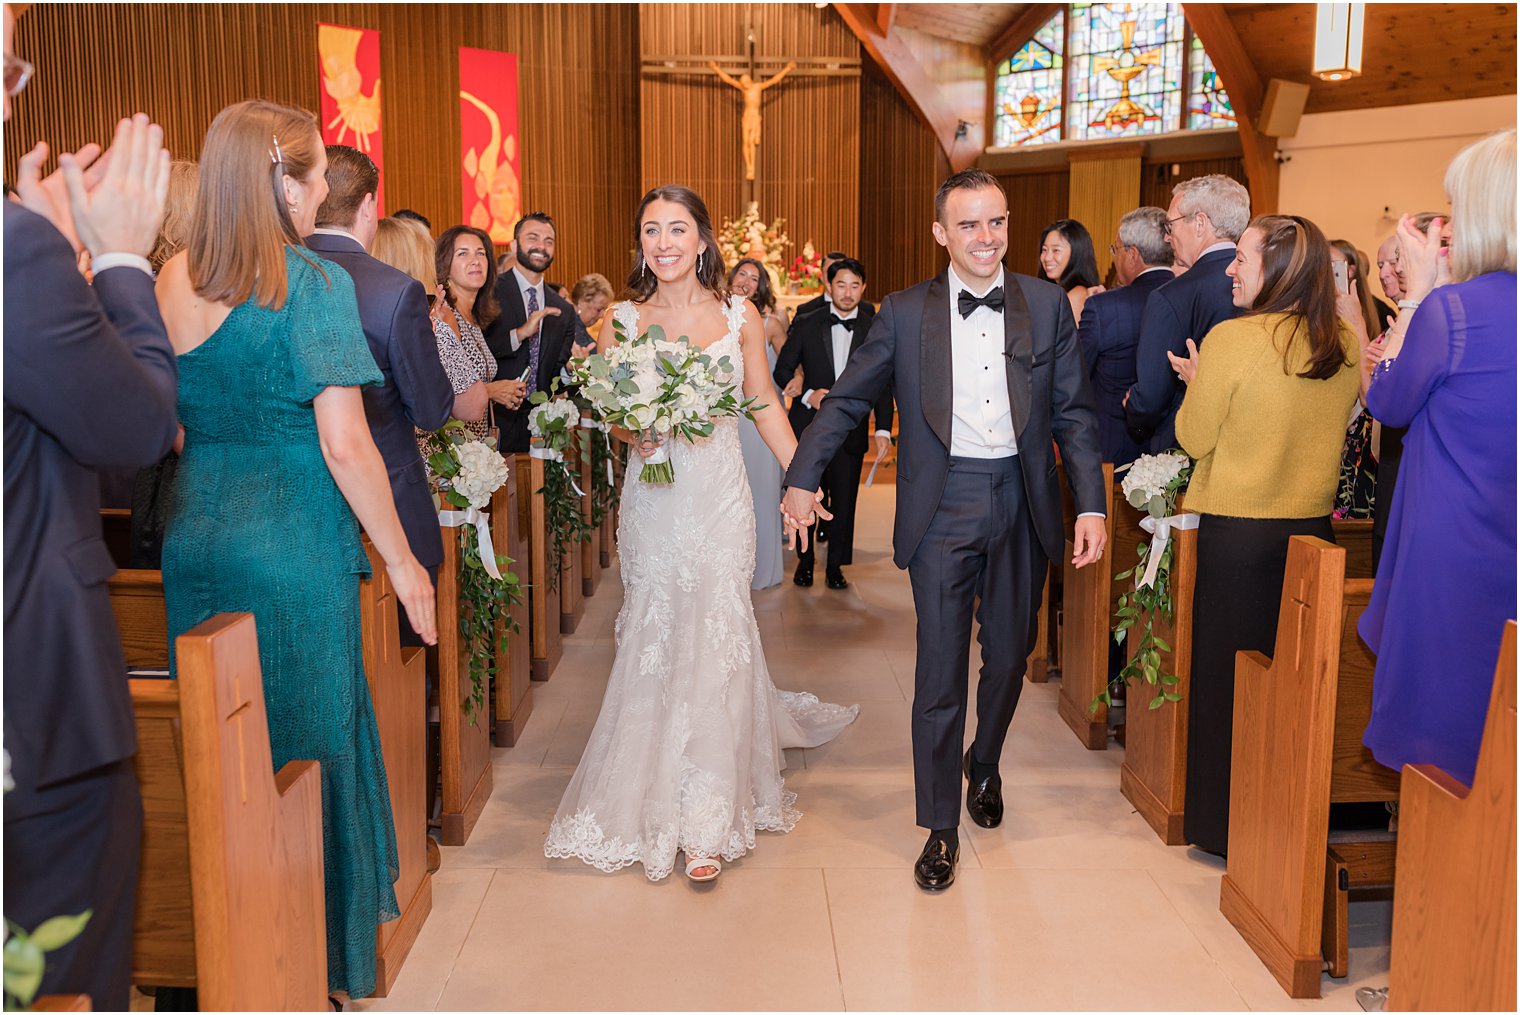 couple walks up aisle after traditional church wedding ceremony in New Jersey